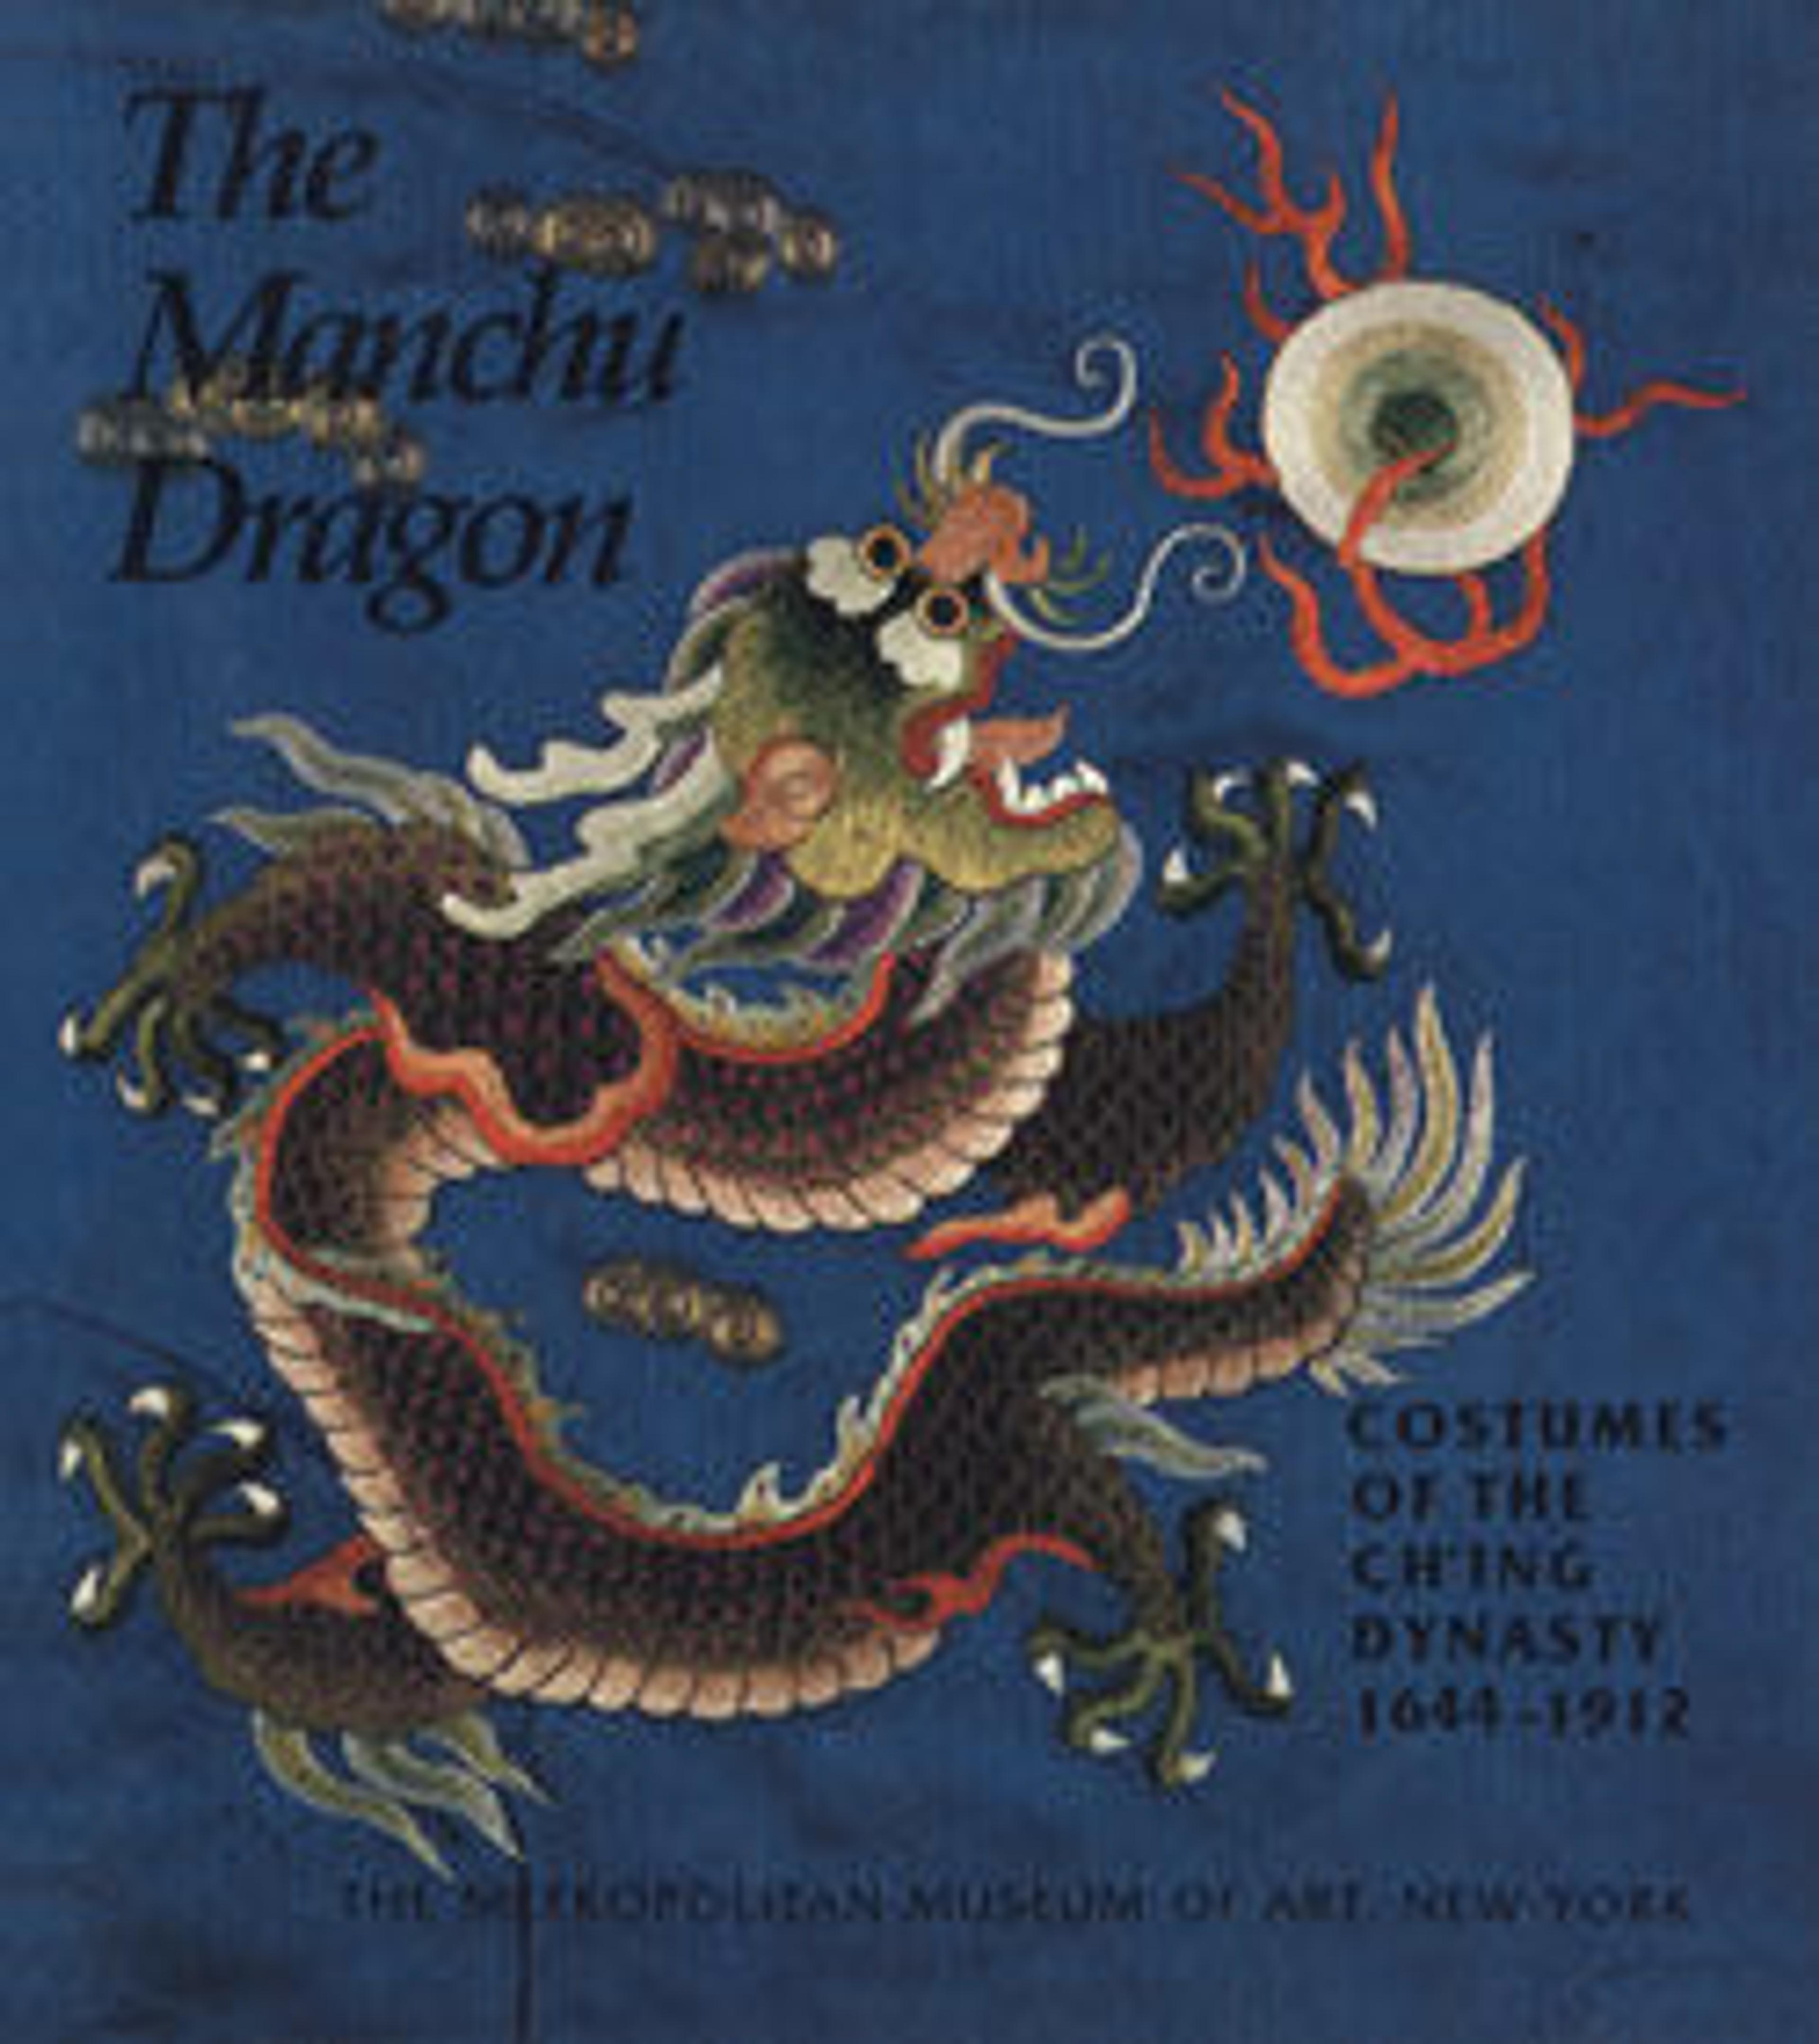 The Manchu Dragon: Costumes of the Ch'ing Dynasty, 1644-1912